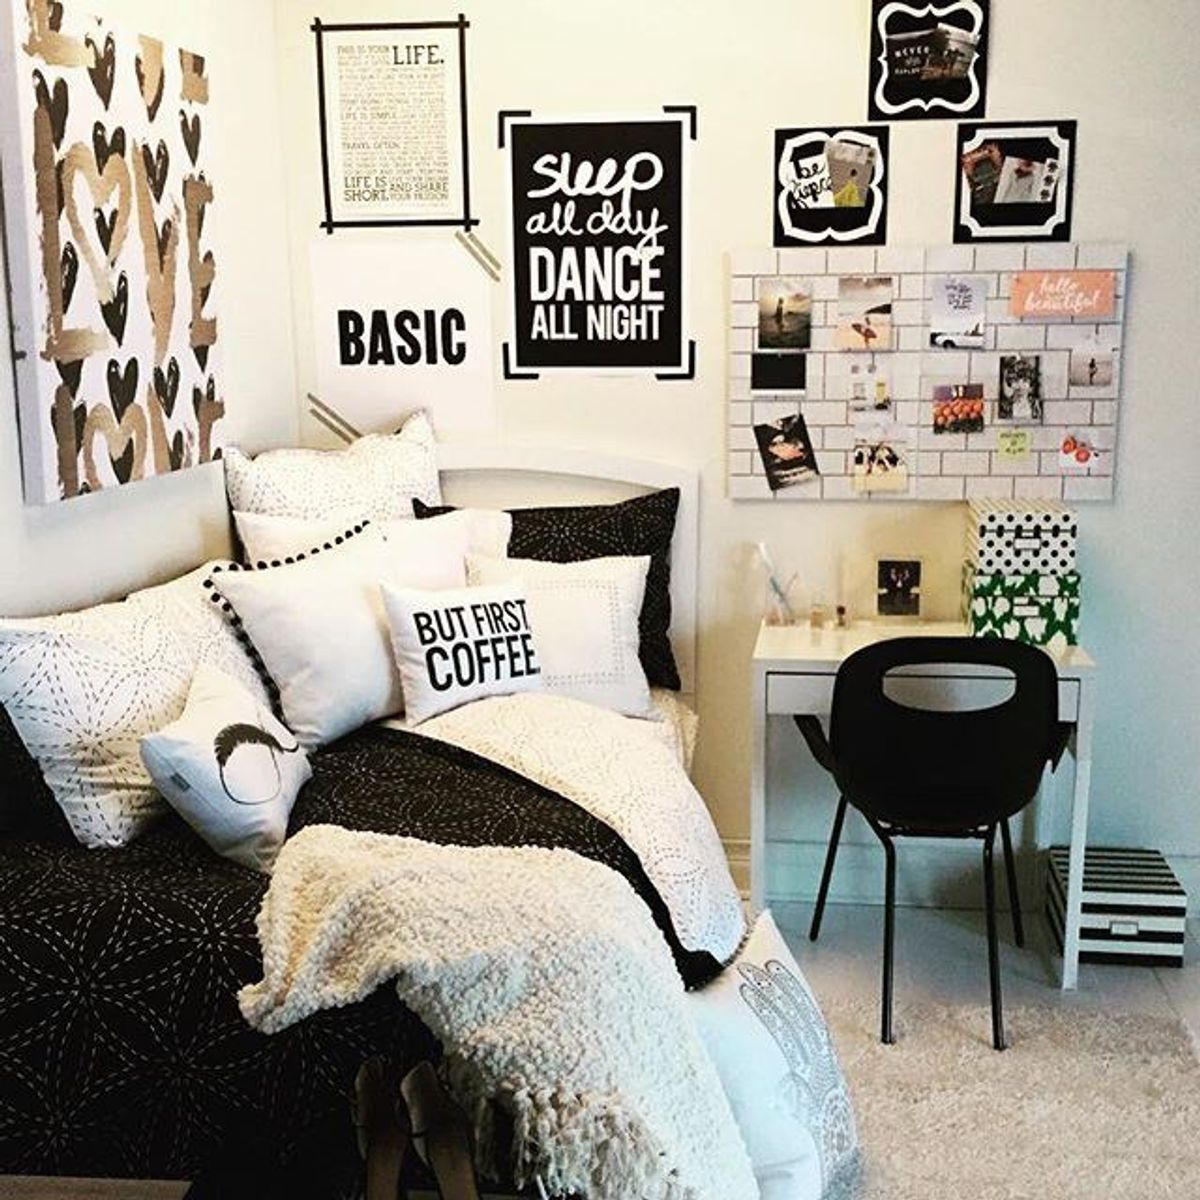 5 Reasons To Live In An All-Female Dorm